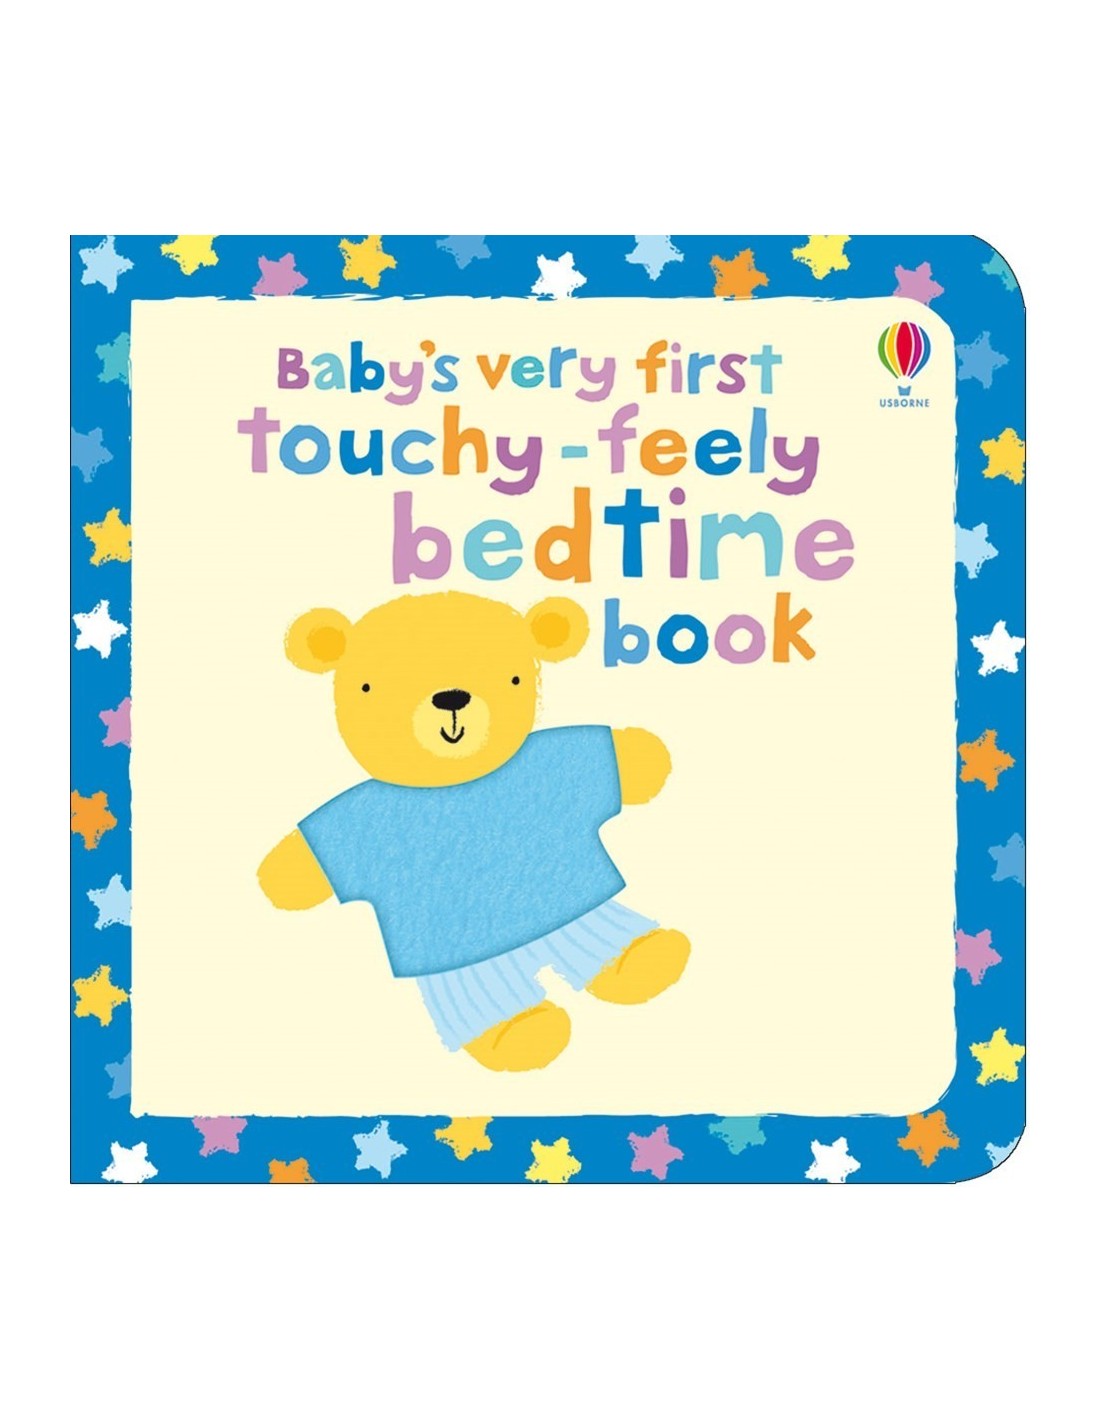 Baby's very first touchy-feely bedtime book